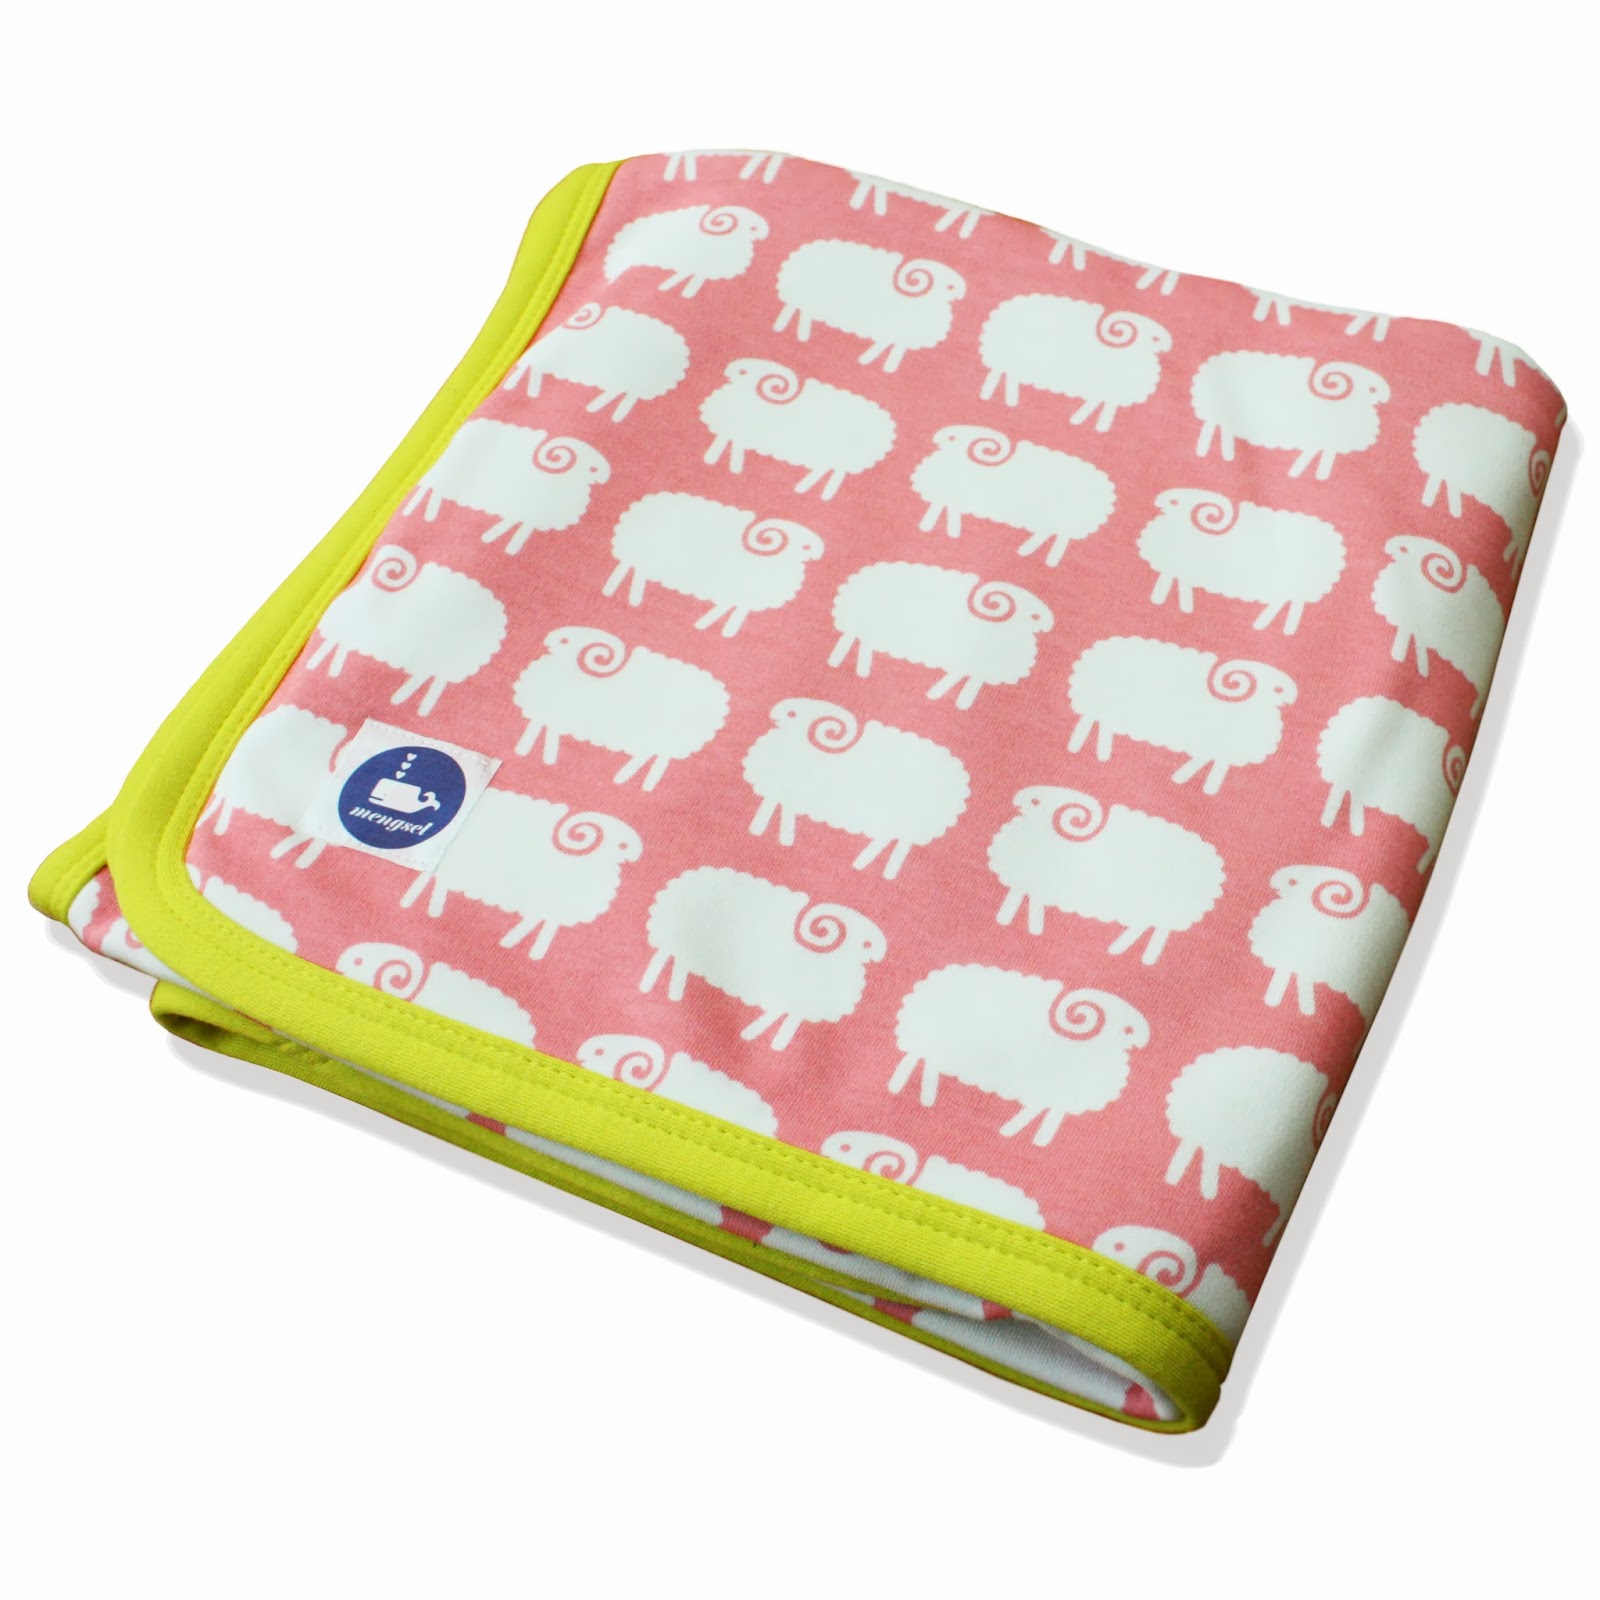 http://mengsel.com/collections/frontpage/products/sheep-baby-blanket